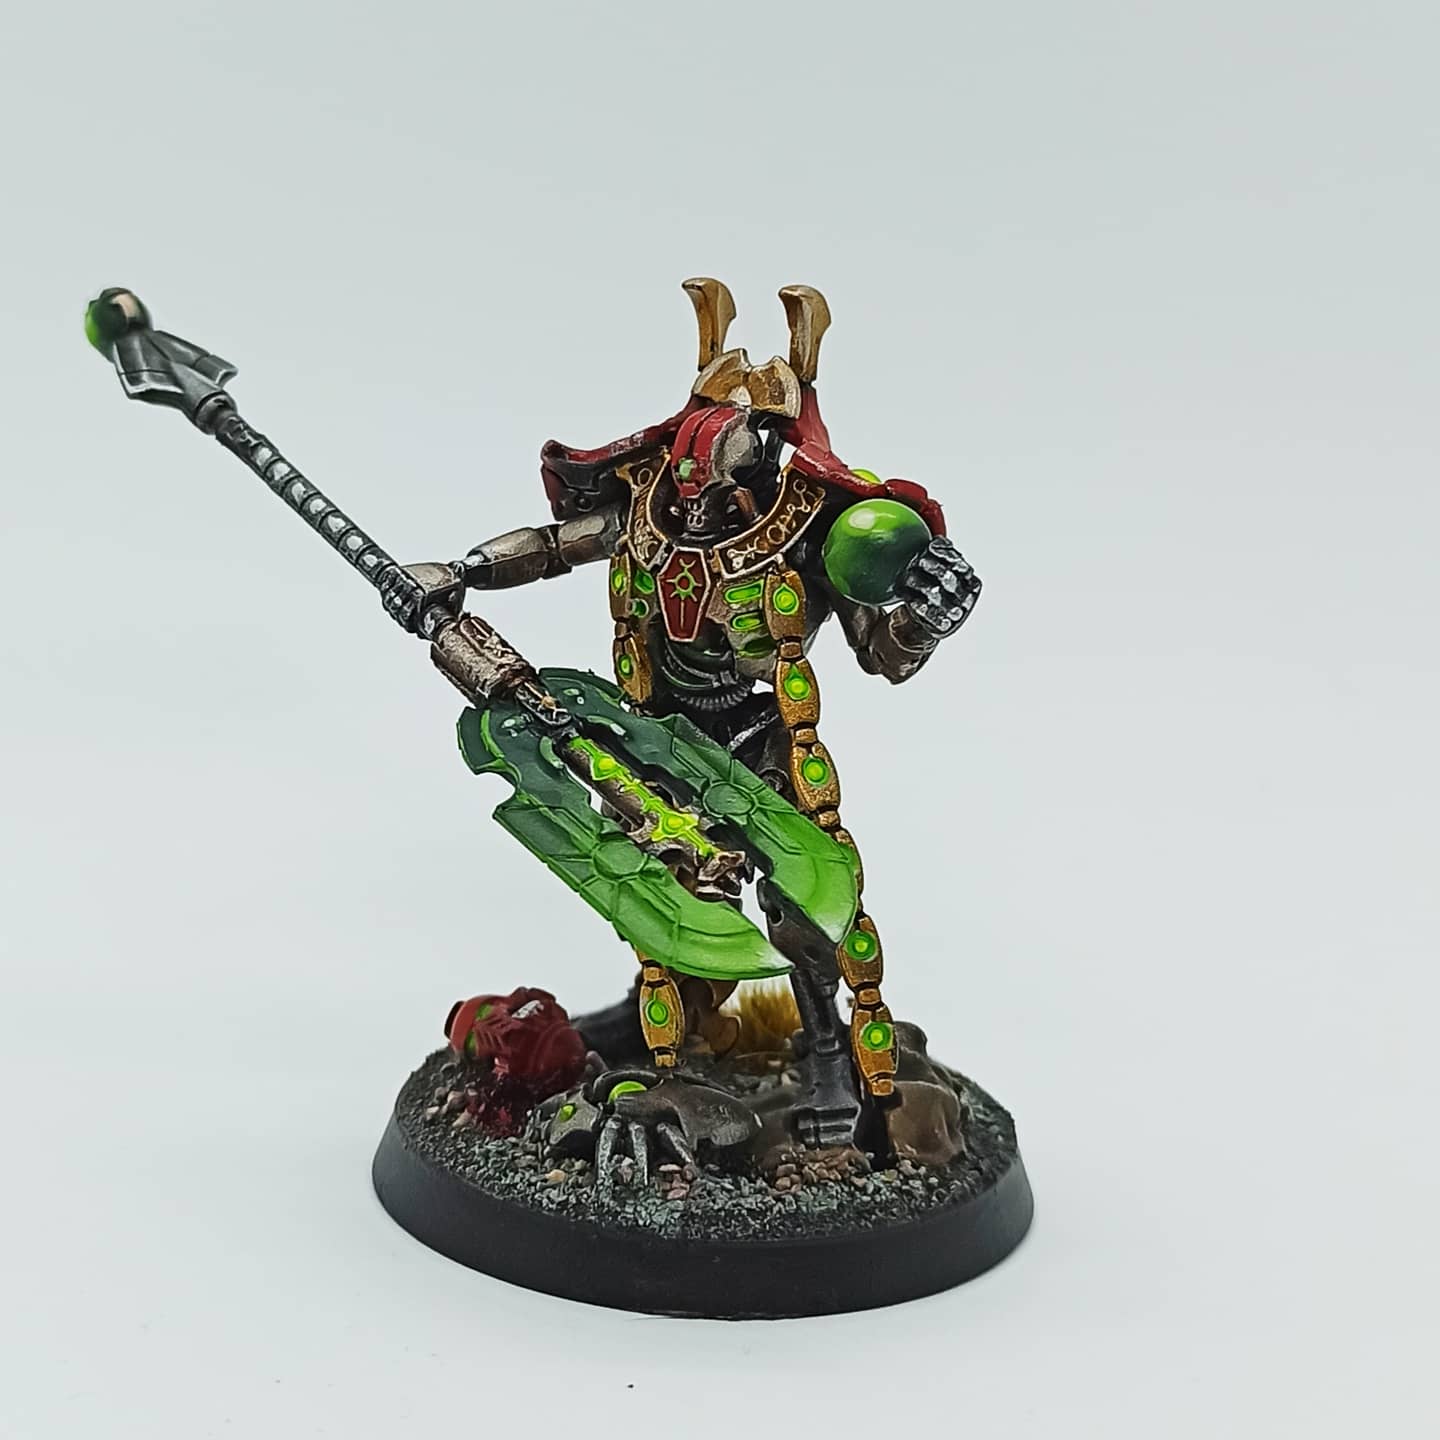 J-O-A-T on Twitter: "Converted Overlord finished with custom Staff light and resurrection orb #40k #necrons #necron #gamesworkshop #paintingwarhammer40k #wargaming #miniatures #wh40k #warhammer #wepaintminis #warmongers